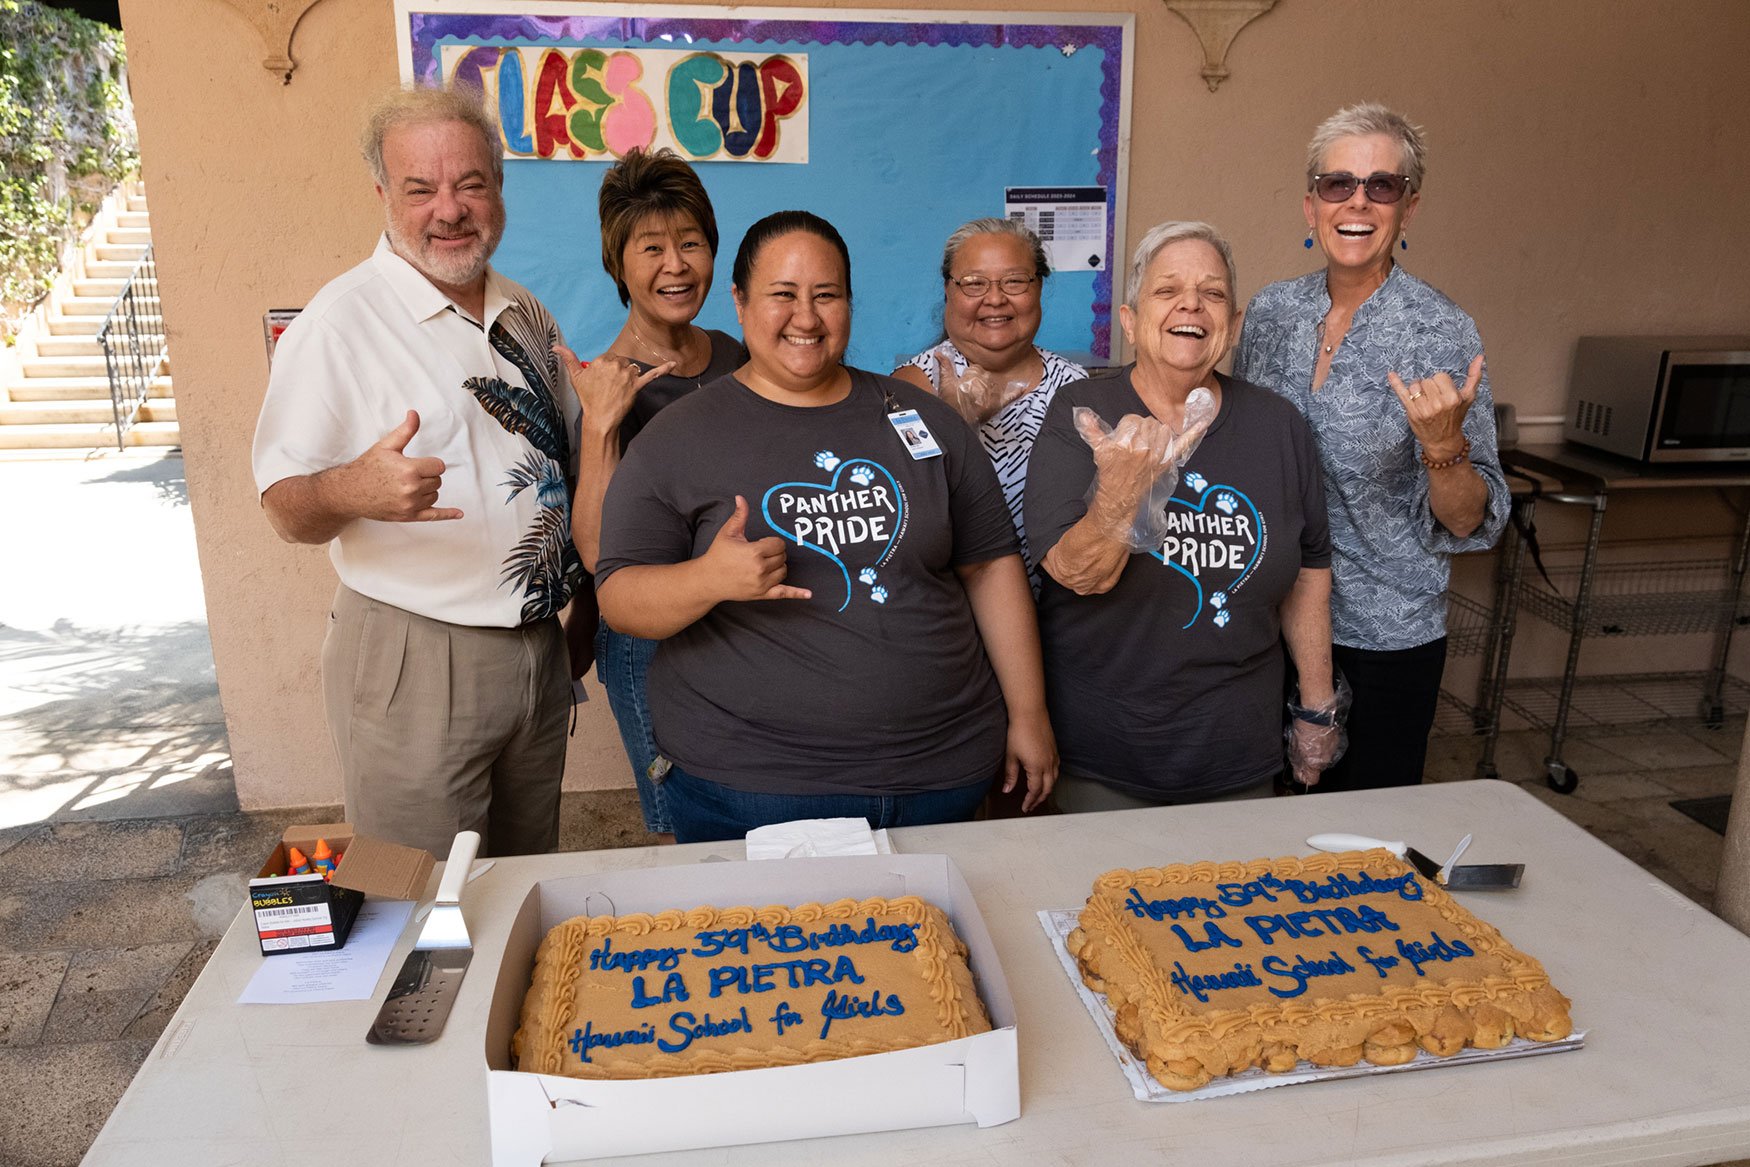 Who's ready for cake?! School trustees, faculty, and staff members get ready to start the celebration.